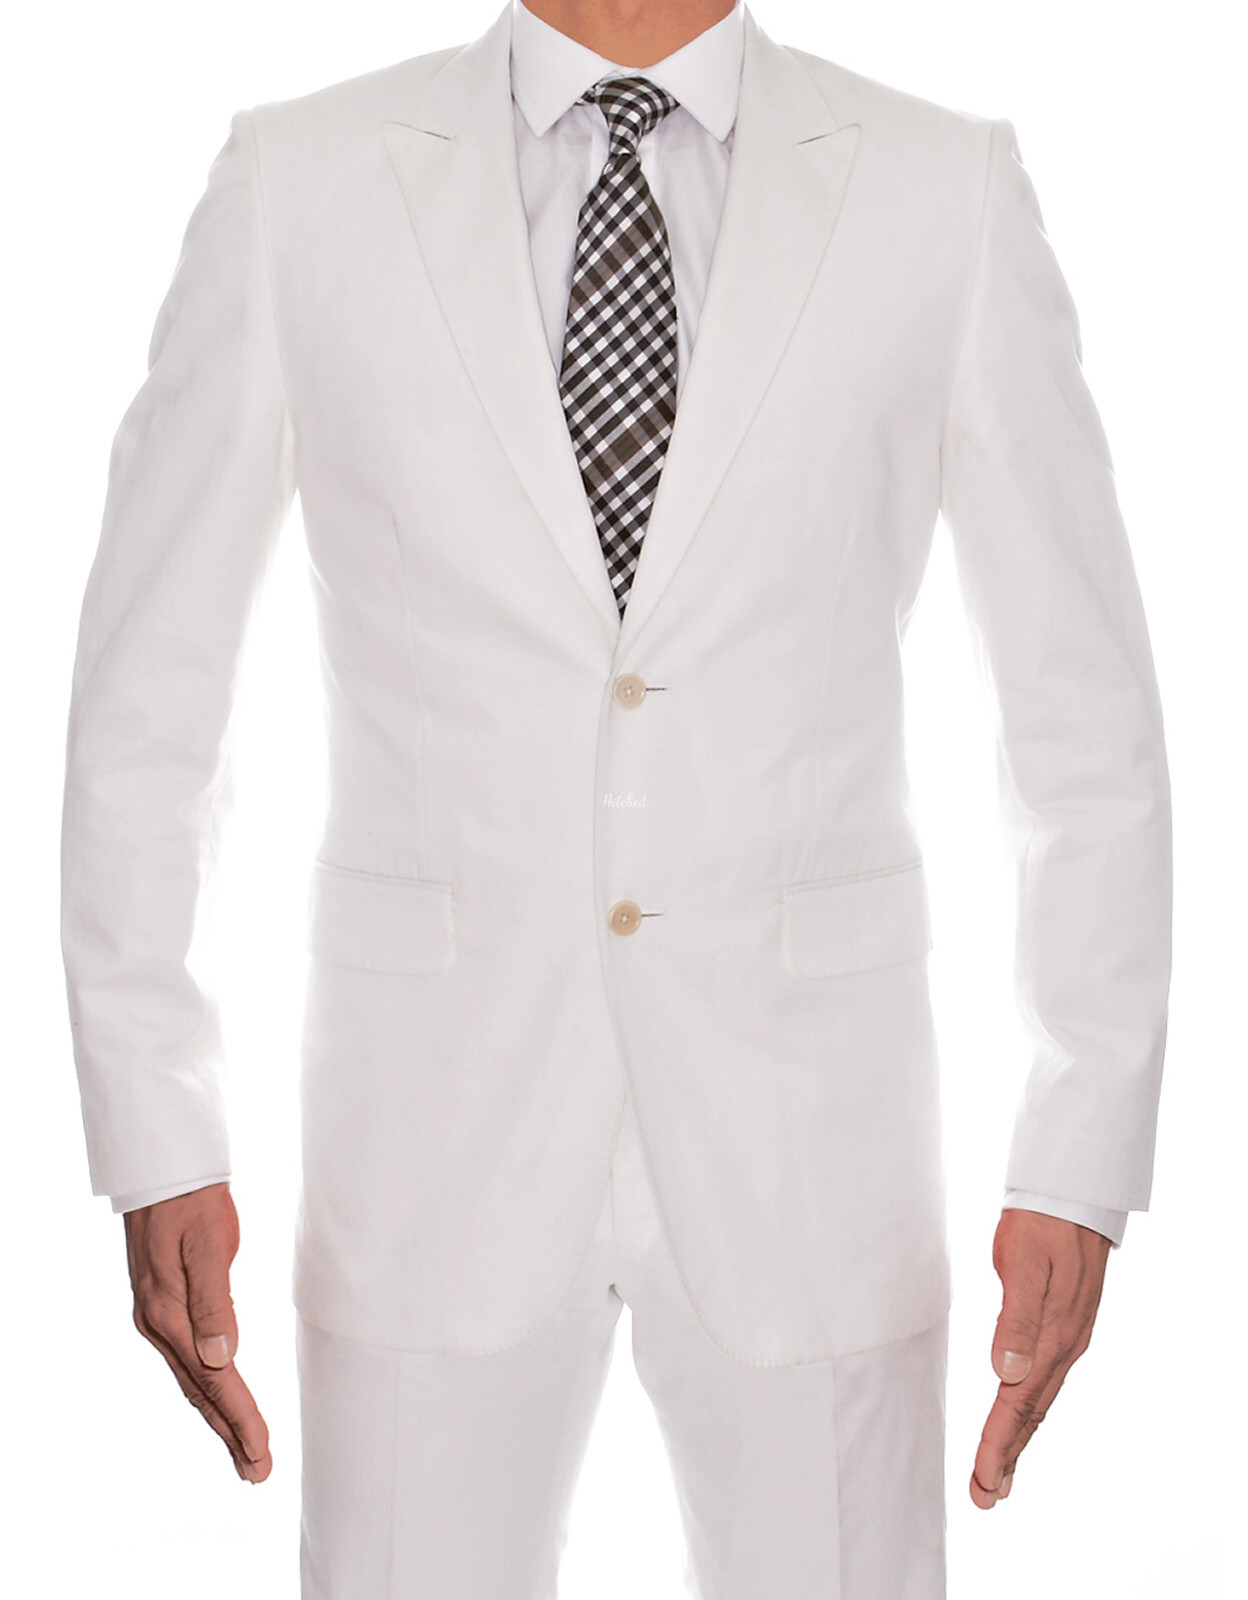 White Cotton 2 Piece Mens Wedding Suit from Adam Waite - hitched.co.uk